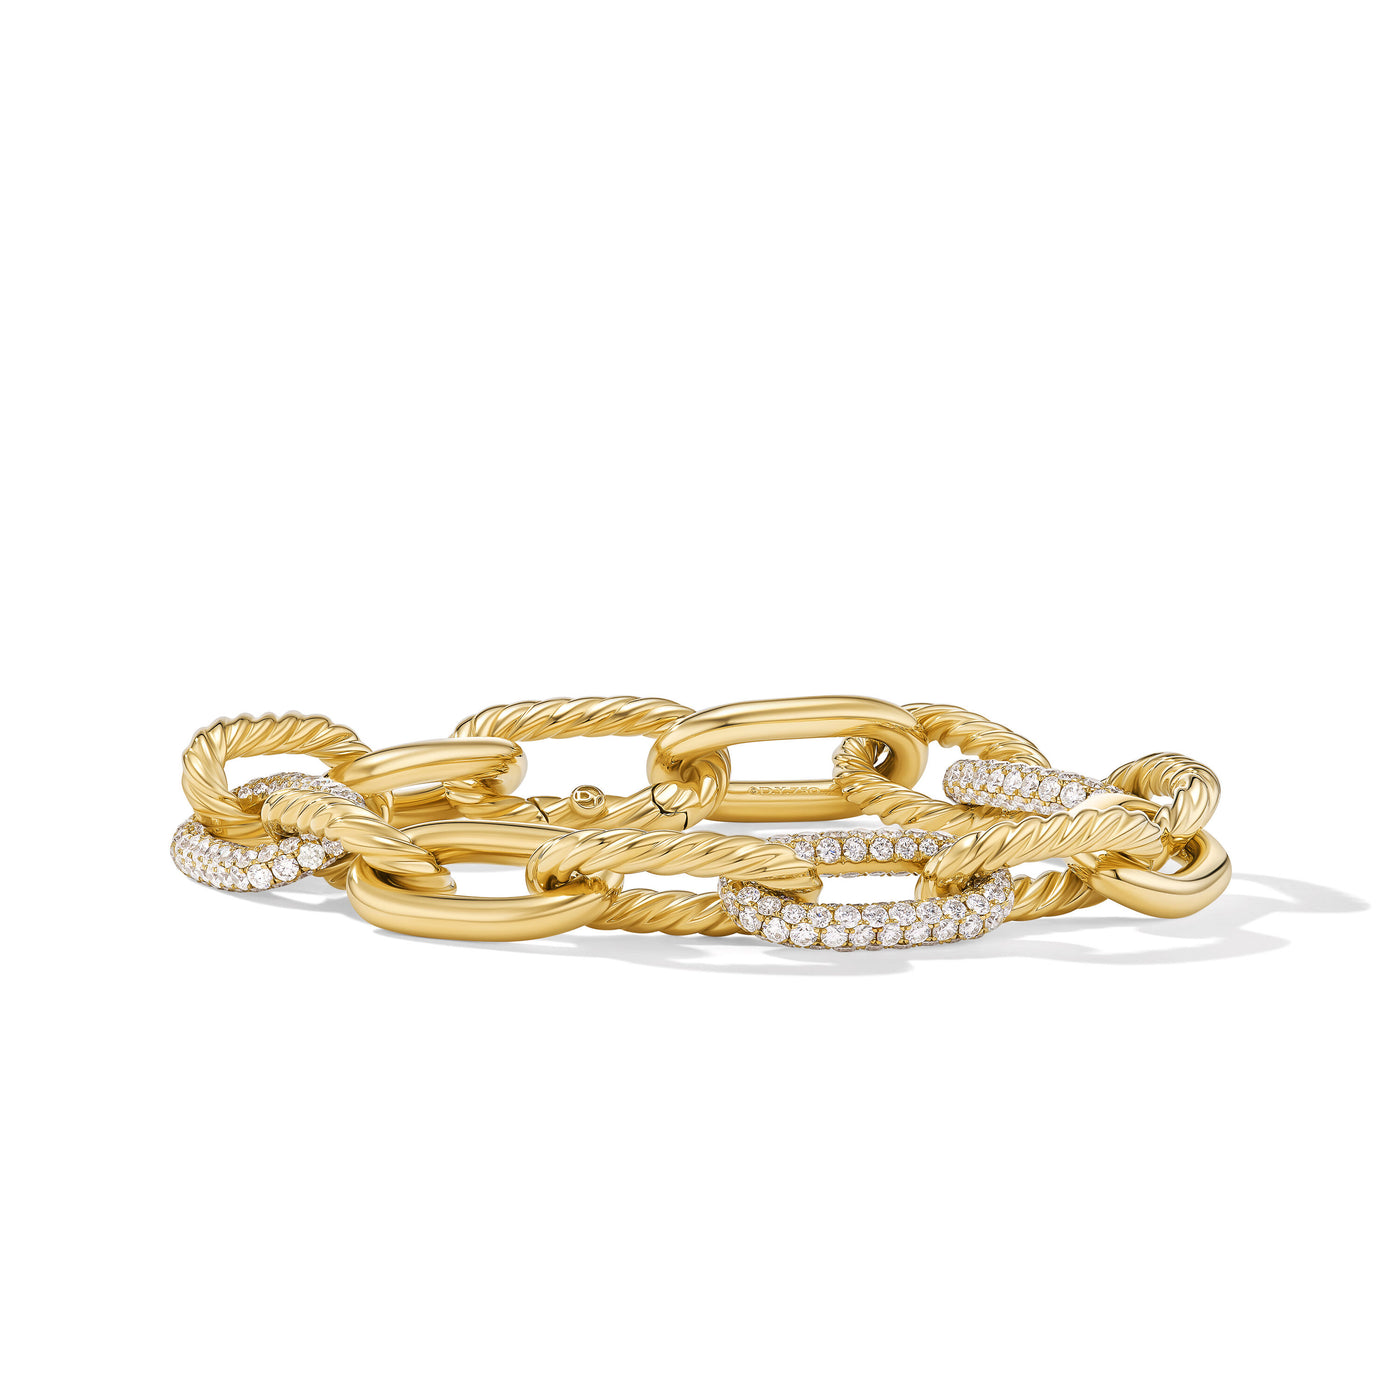 DY Madison® Chain Bracelet in 18K Yellow Gold with Diamonds\, 11mm